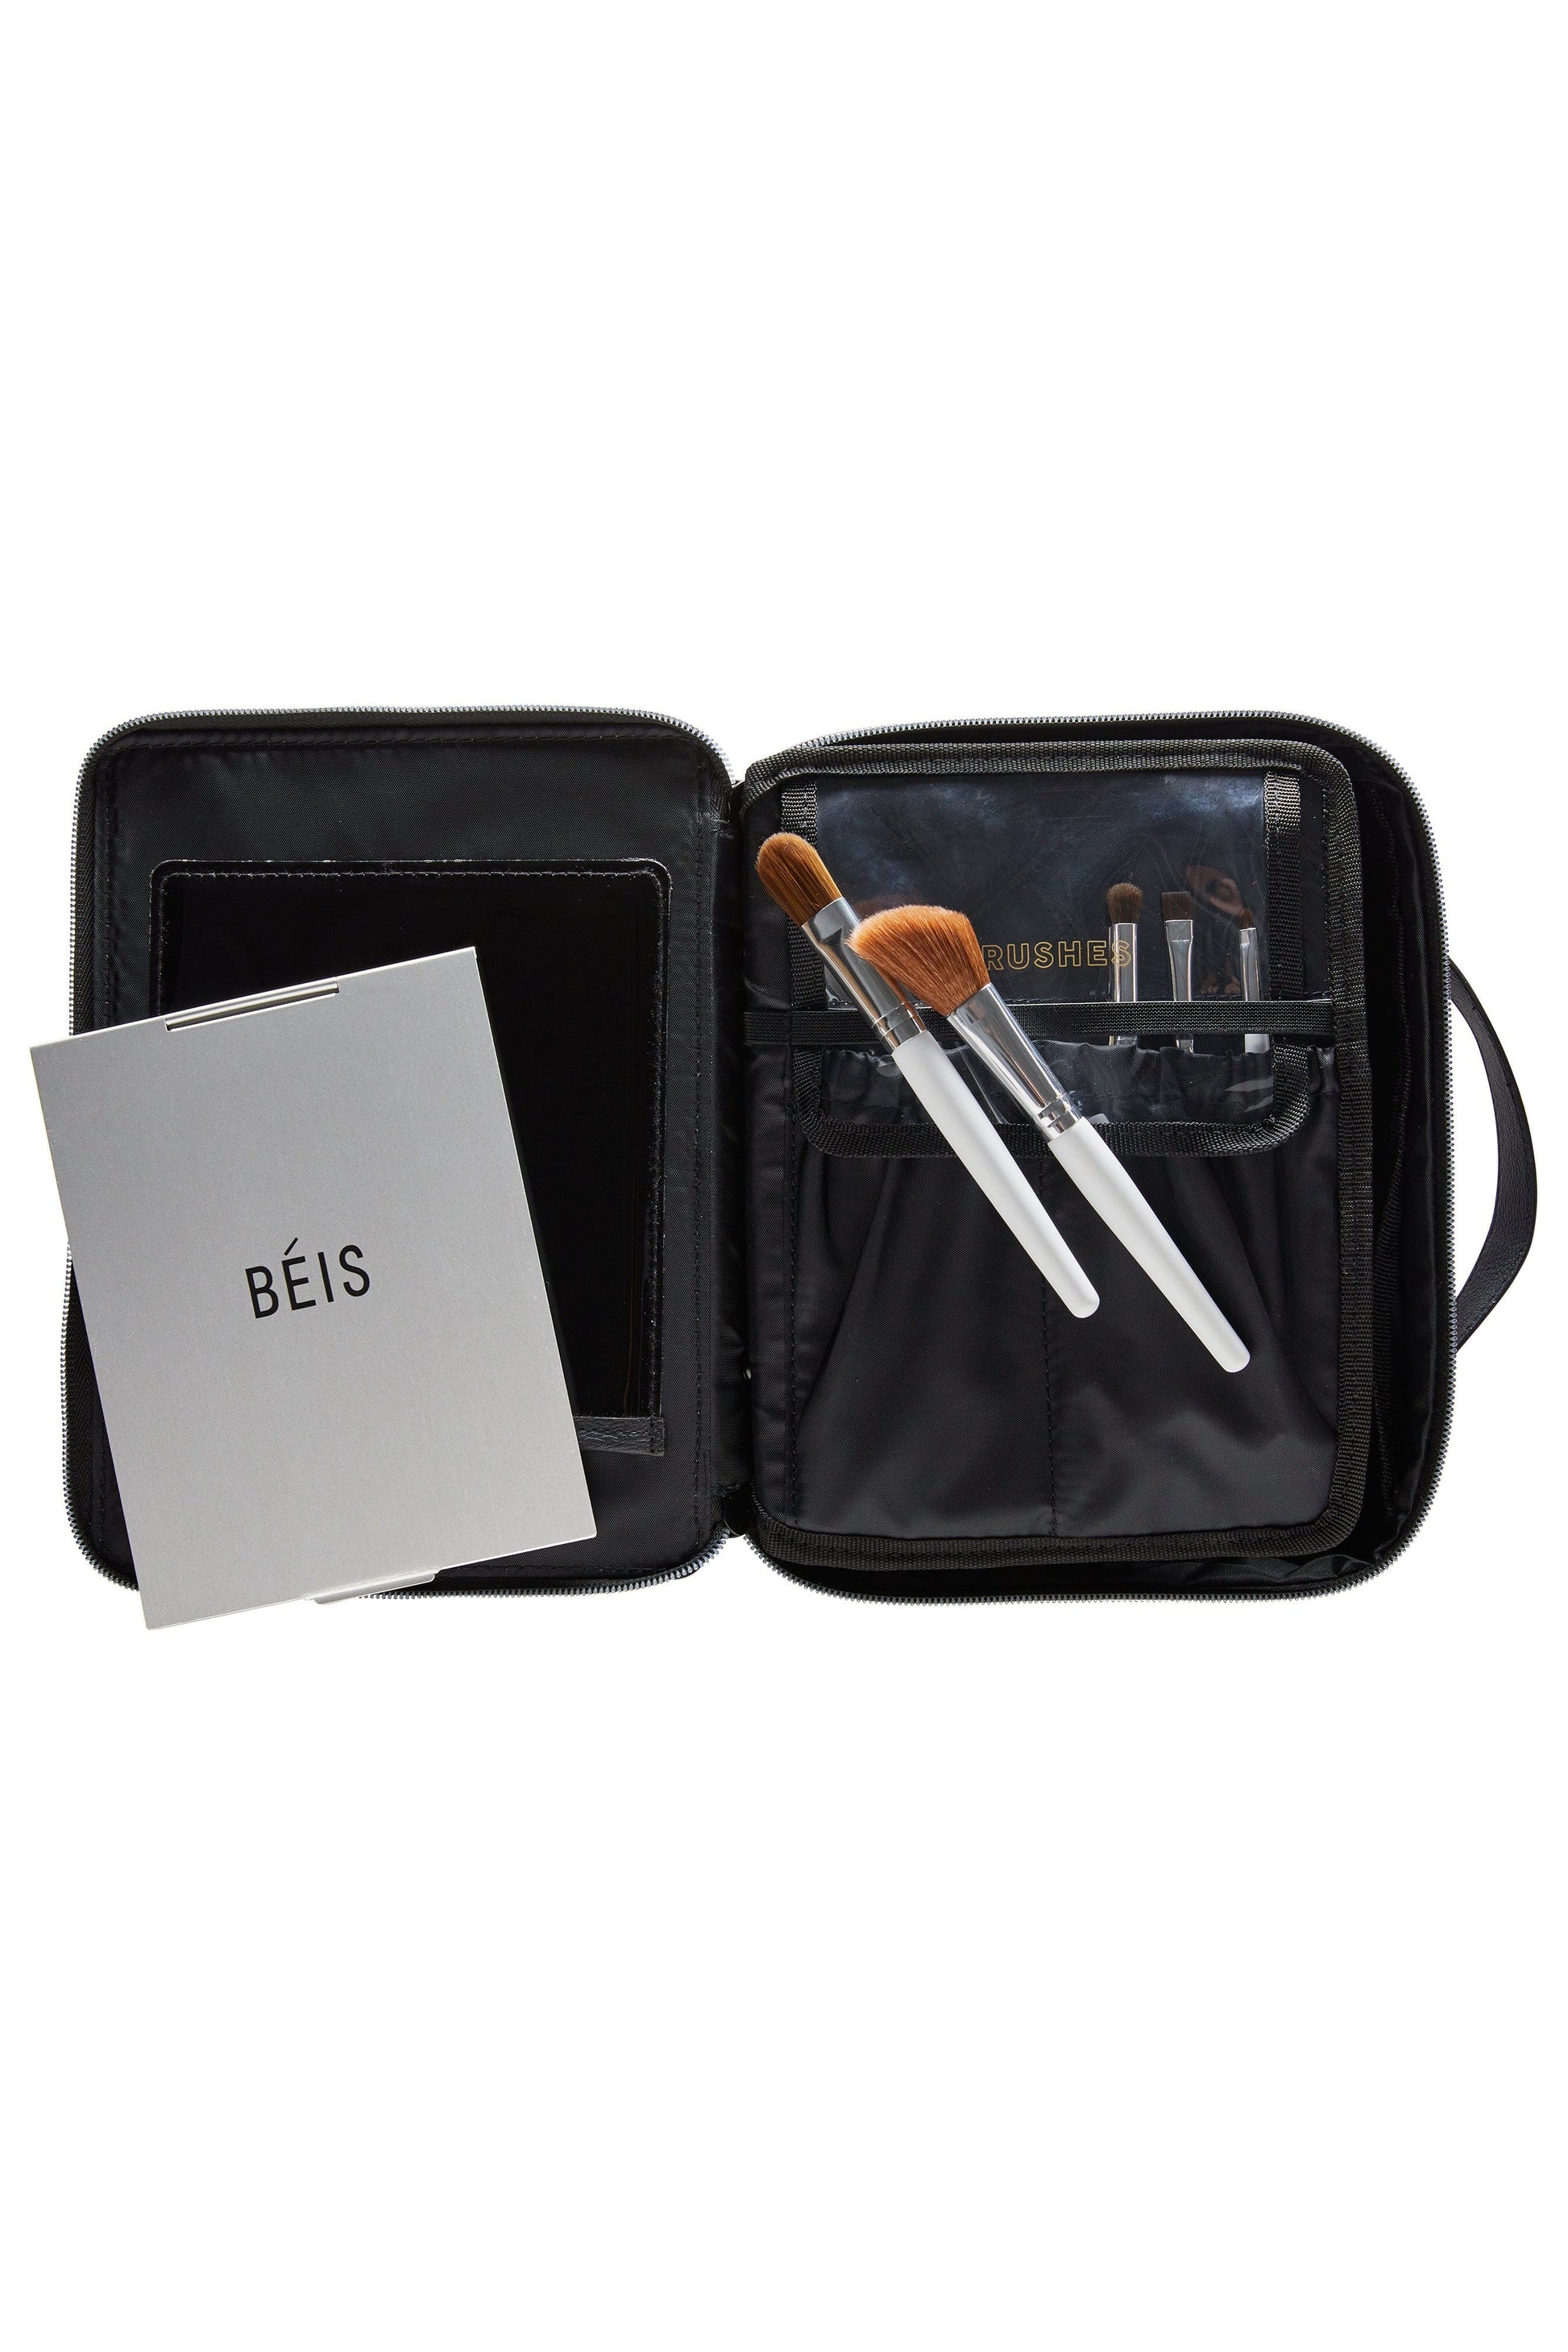 Cosmetic Case Black Open Makeup Brushes